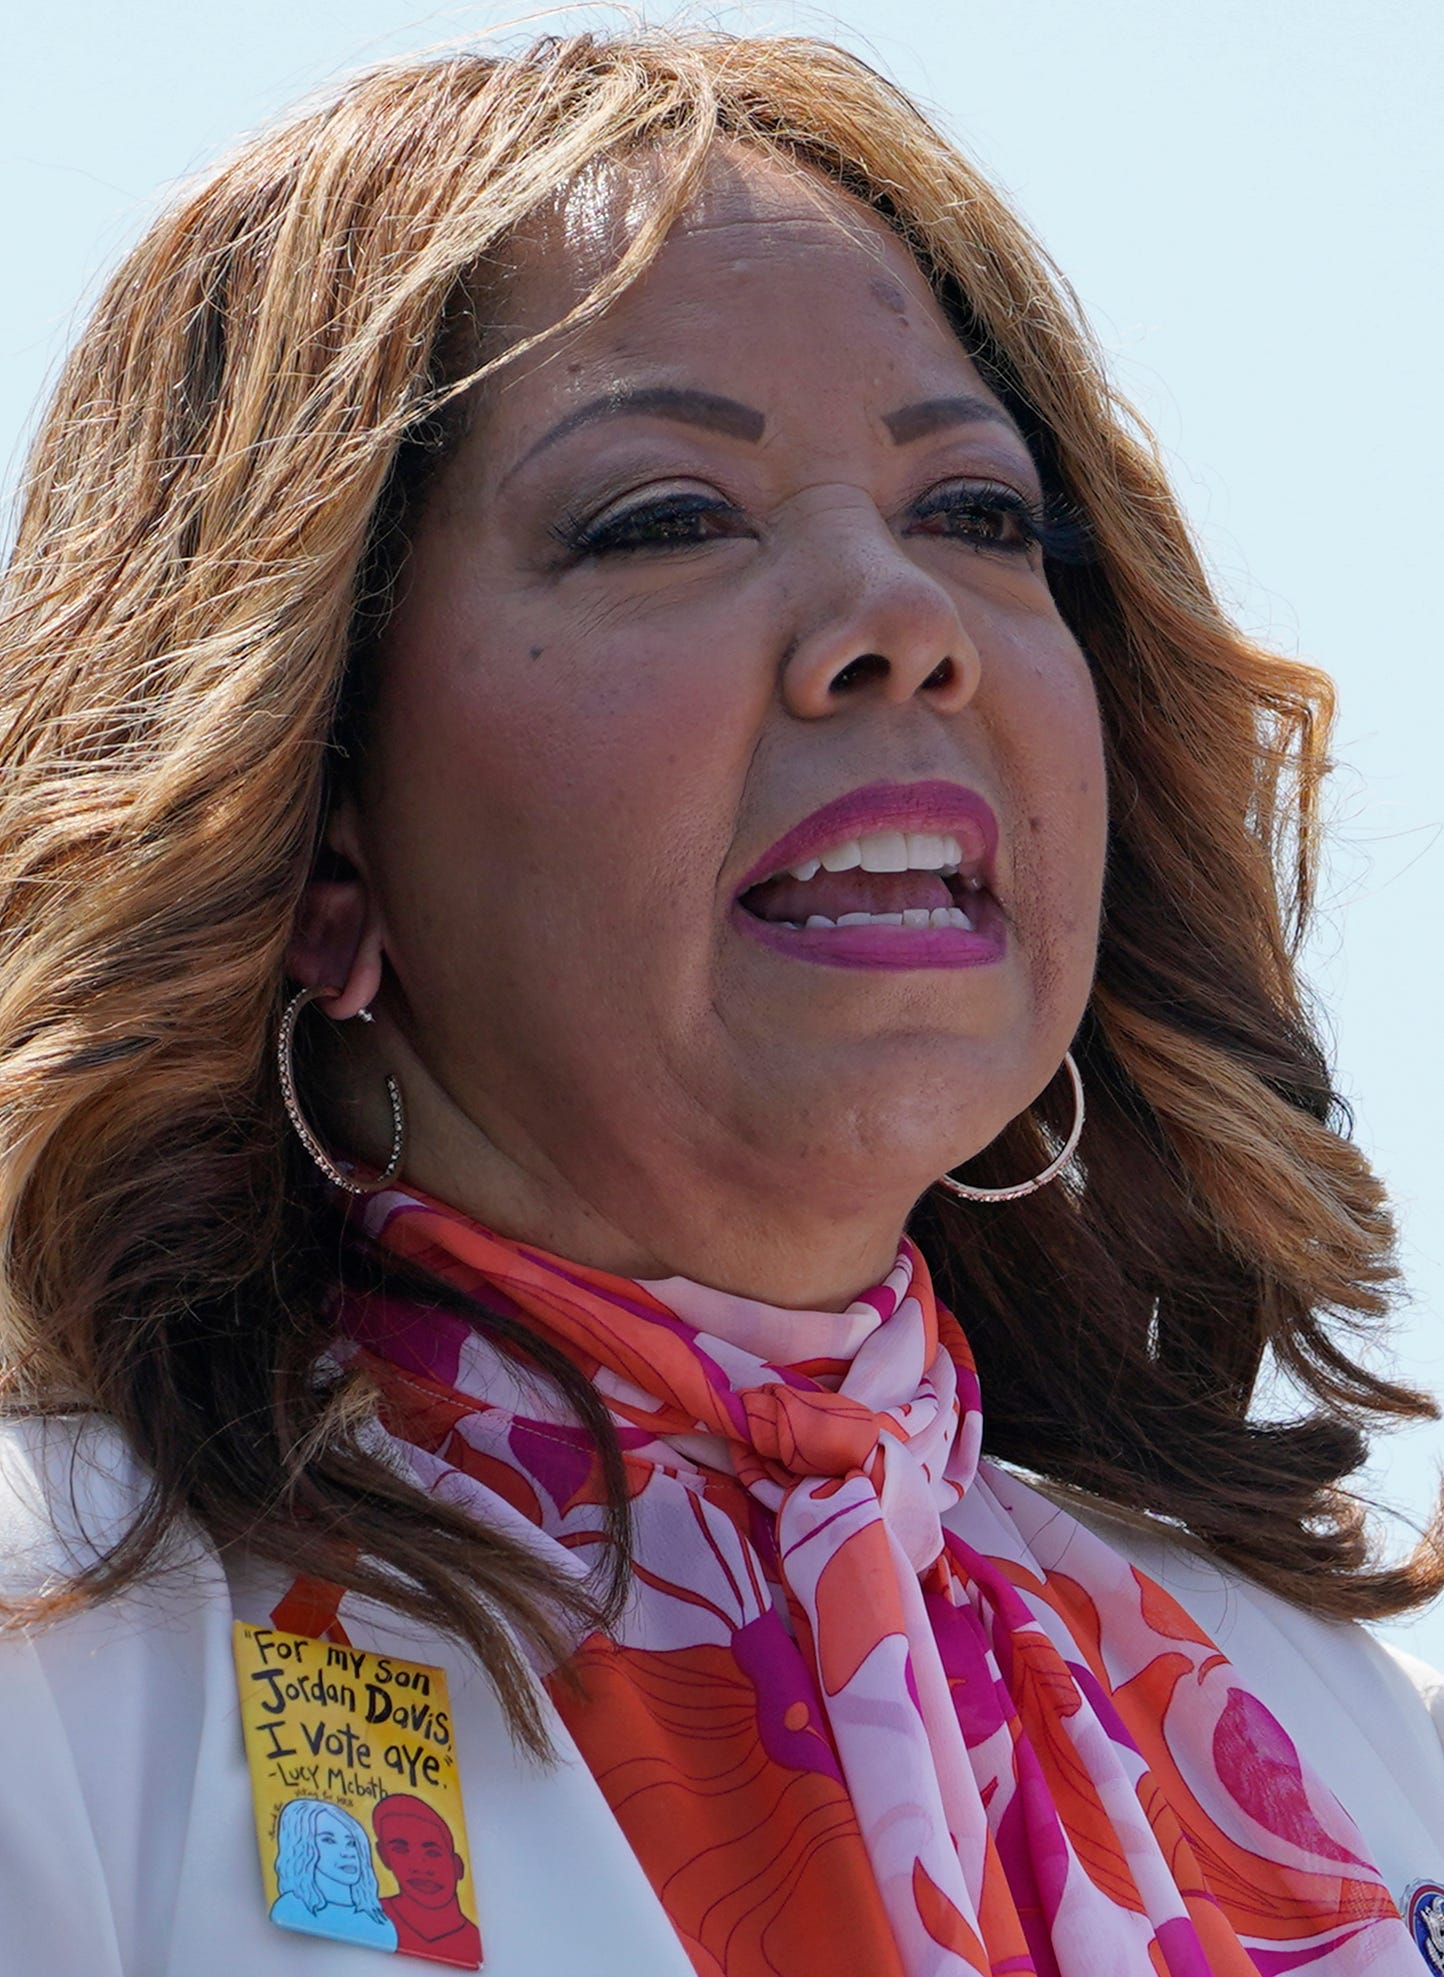 Rep. Lucy McBath, D-Ga., speaks during a rally near Capitol Hill in Washington,  on June 8, 2022, sponsored by Everytown for Gun Safety and its grassroots networks, Moms Demand Action and Students Demand Action.